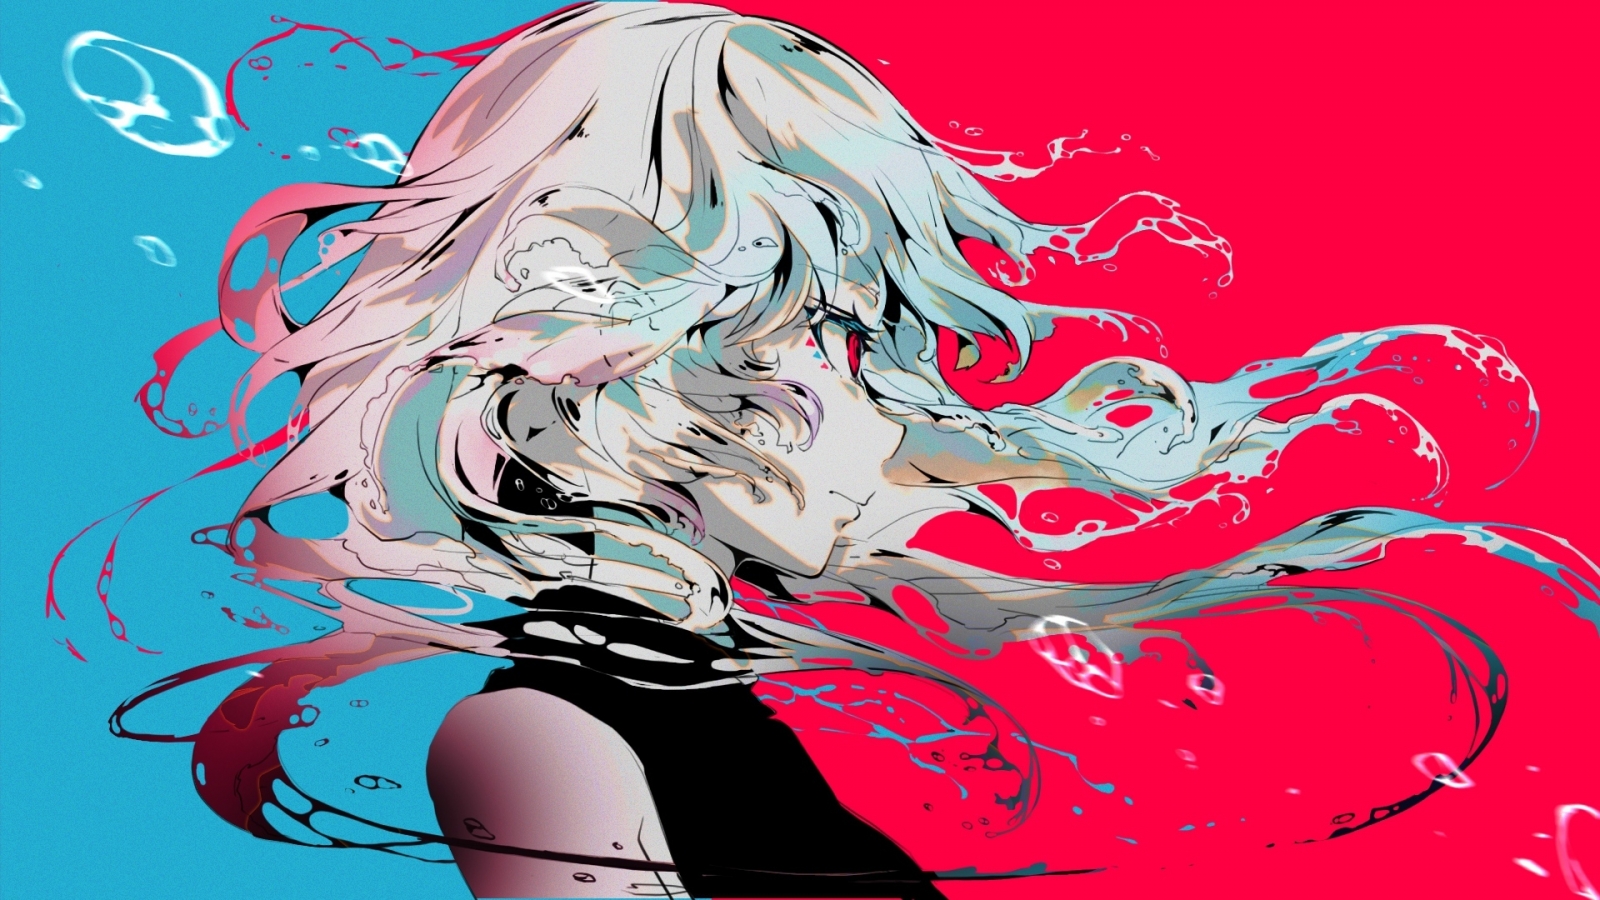 Wallpaper Profile View, Anime Girl, Gray Hair, Polychromatic, Red And Blue:1920x1080